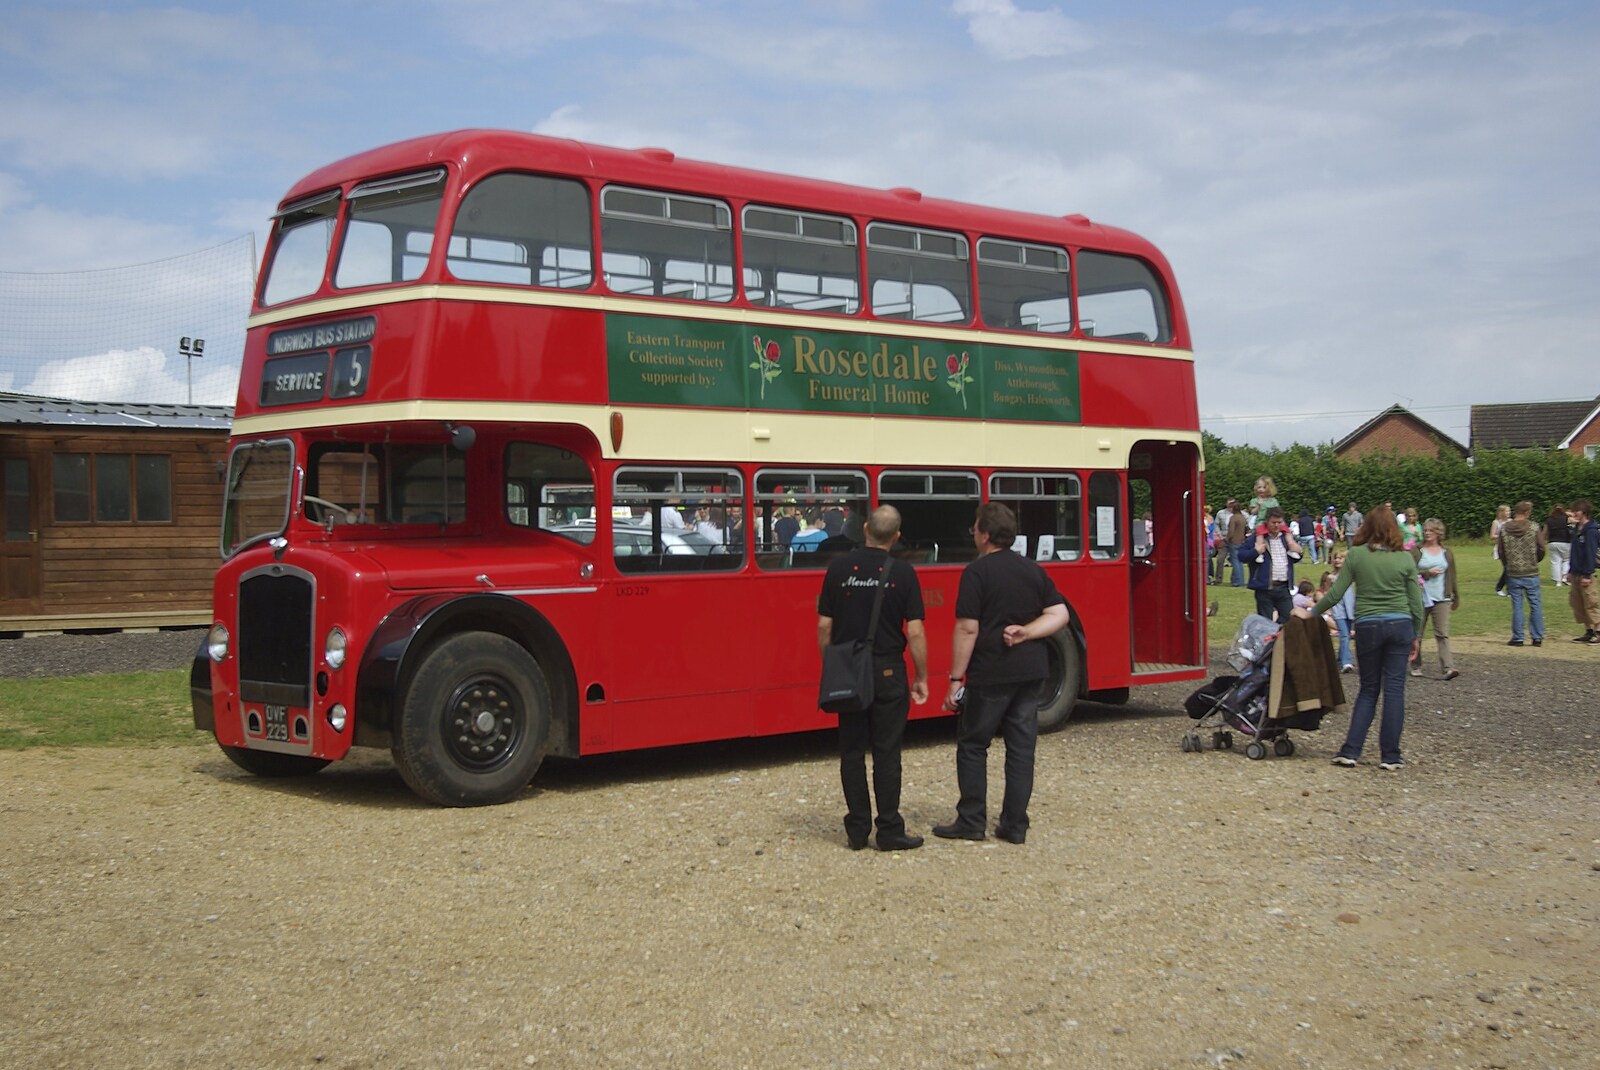 The Routemaster is parked up from Diss Carnival Procession, Diss, Norfolk - 21st June 2009